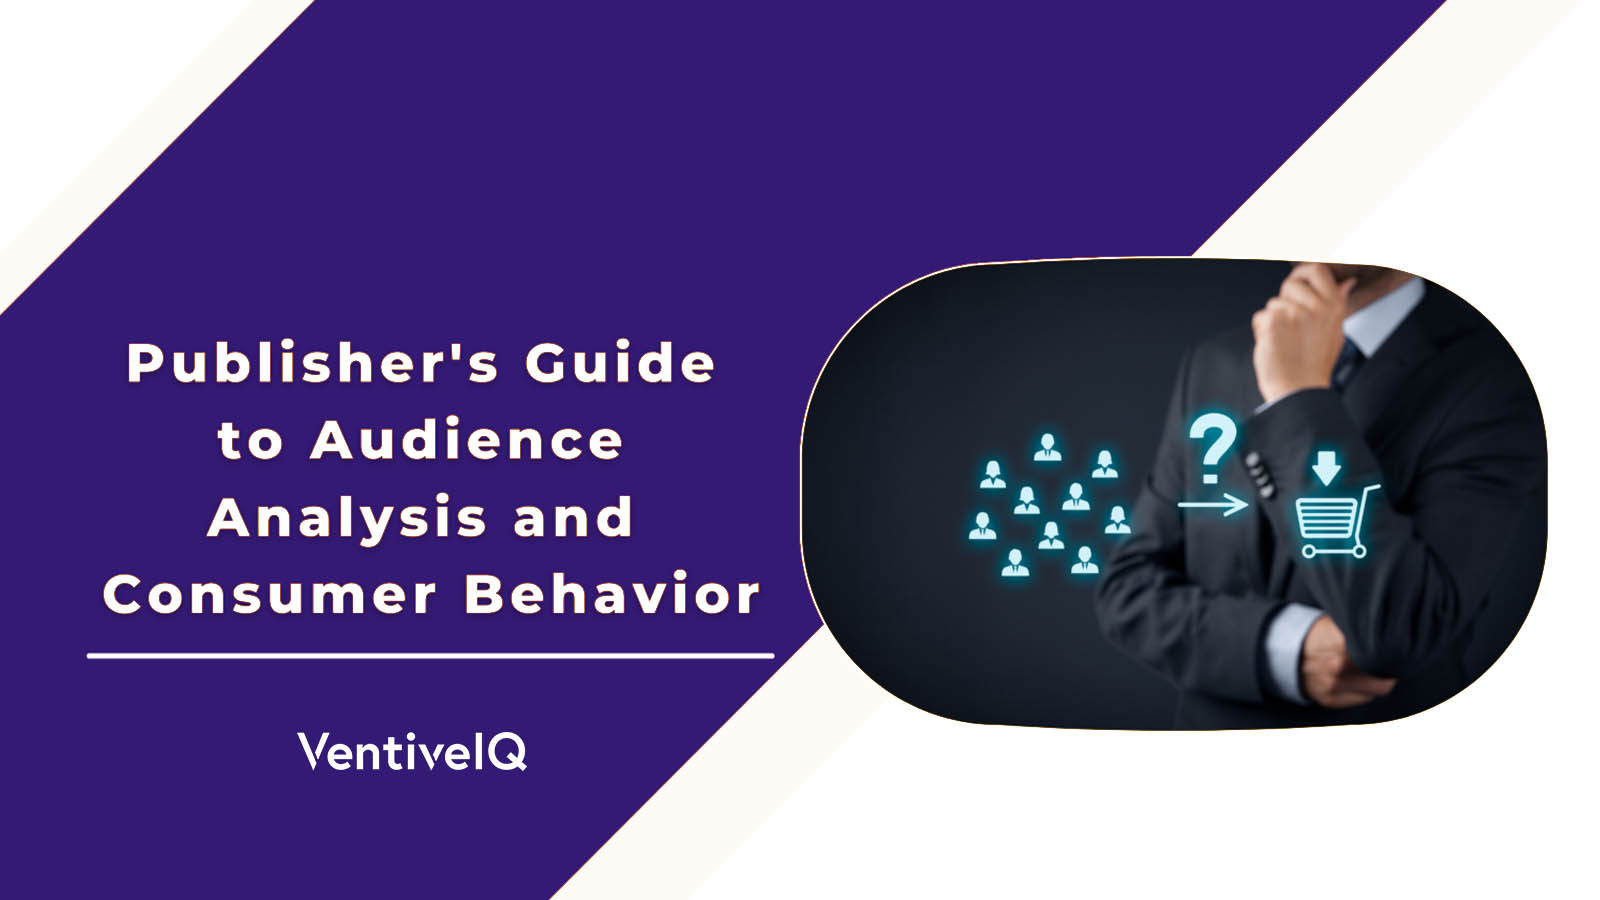 The Publisher’s Guide to Audience Analysis and Consumer Behavior